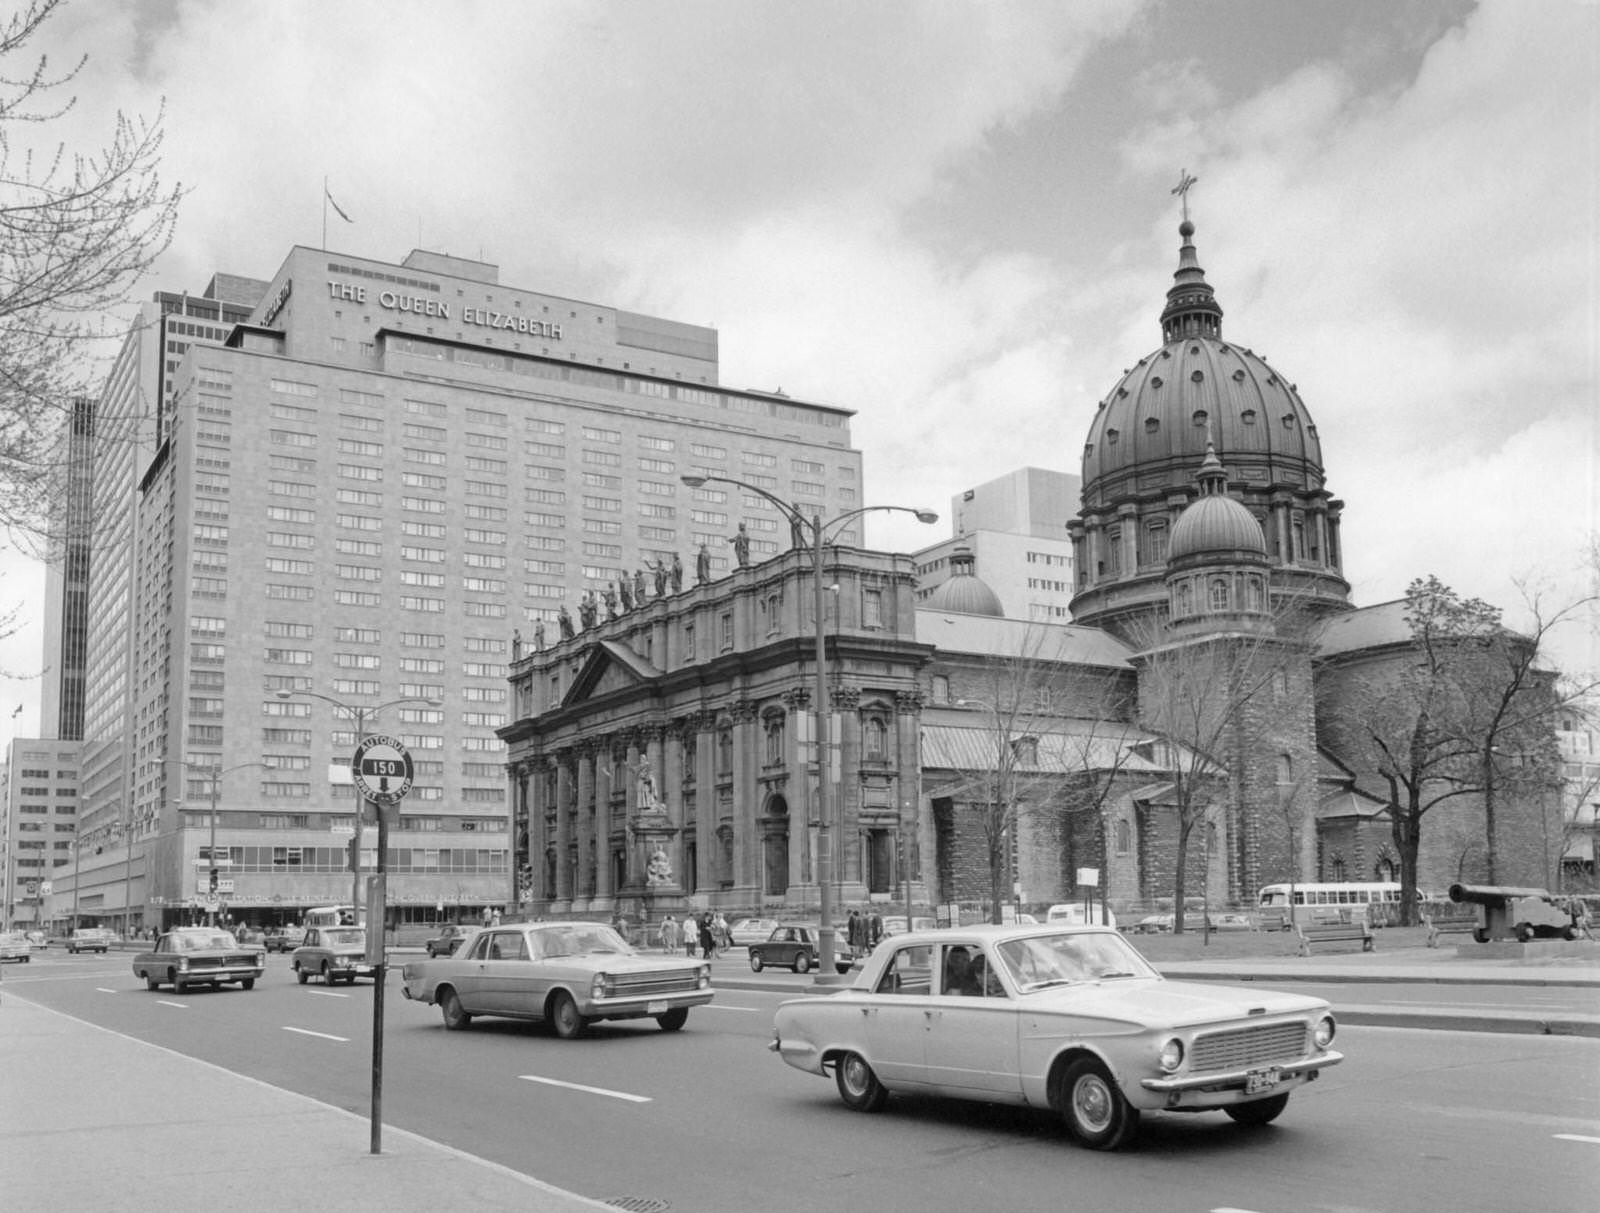 Queen Elizabeth Hotel, with Mary, Queen of the World Cathedral in the foreground, Montreal, 1960s